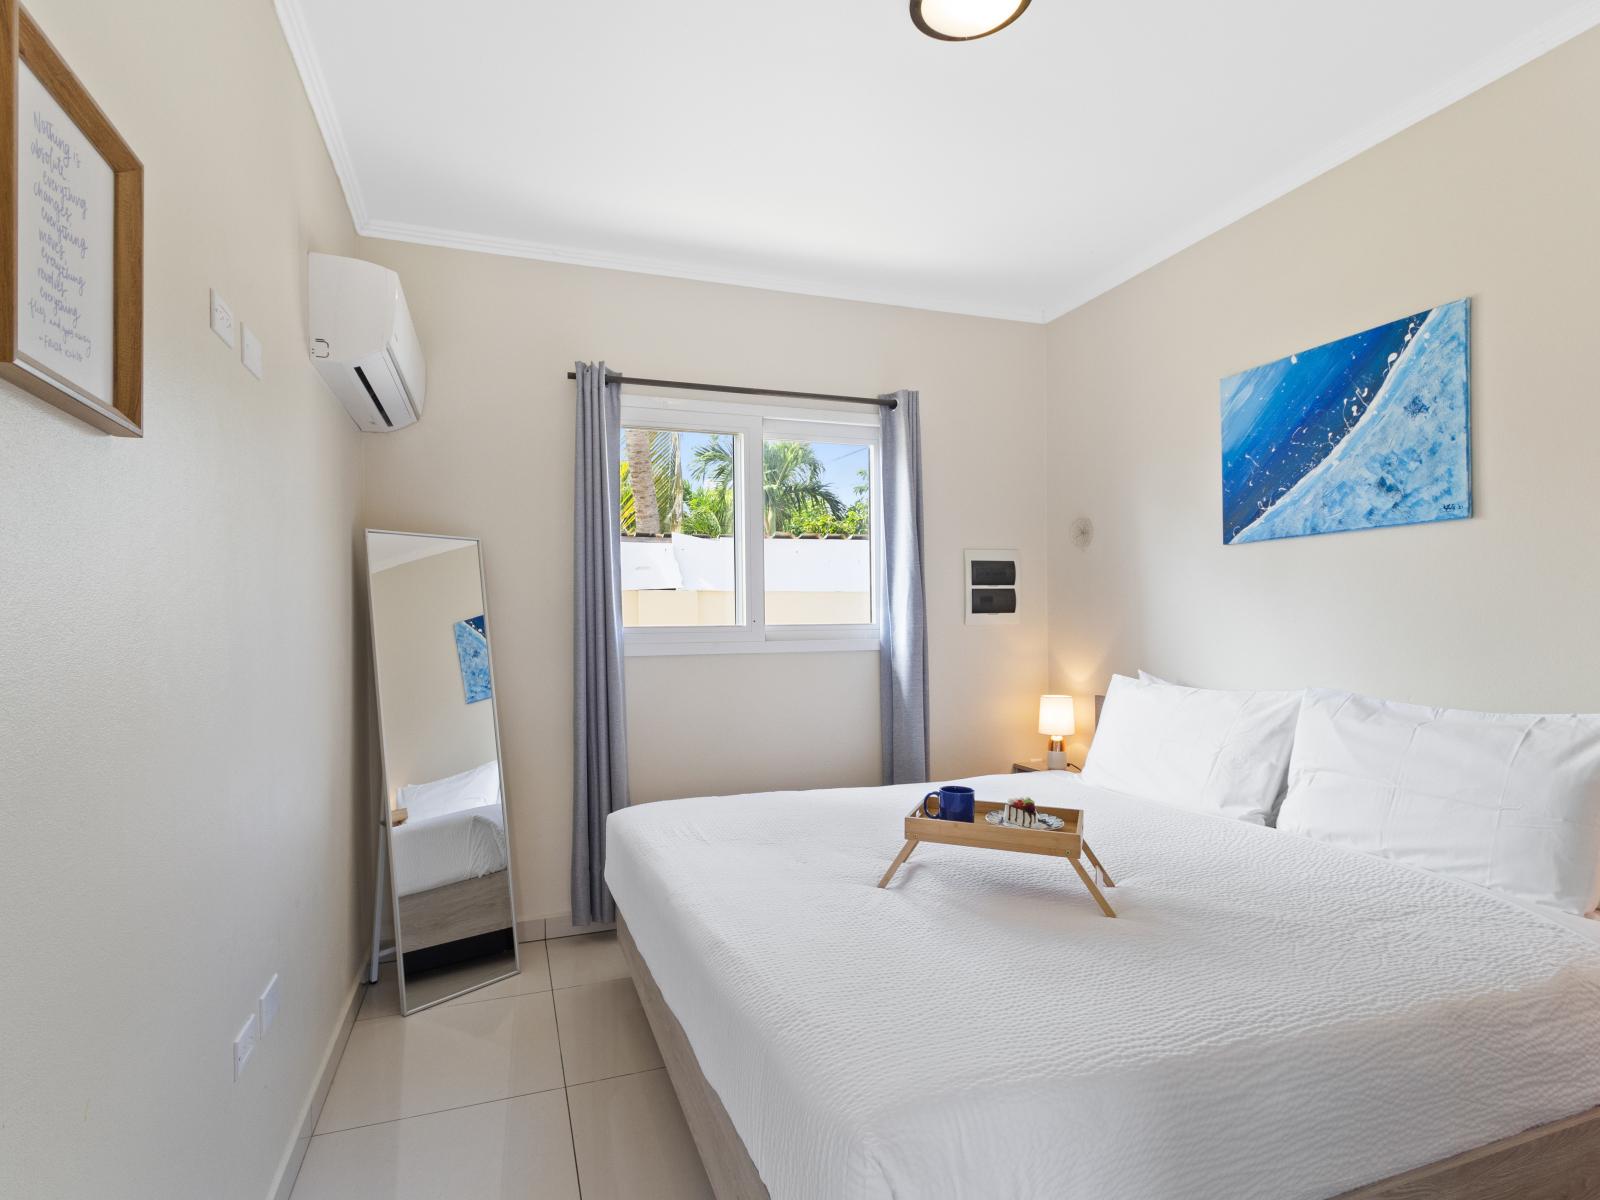 Exquisite bedroom of the apartment in Noord, Aruba - Comfy king size bed - Elegantly designed room beautifully decored with large aesthetic wall paintings - Majestic table lamps - Neat and clean linen with soft pillows - Large size stand mirror